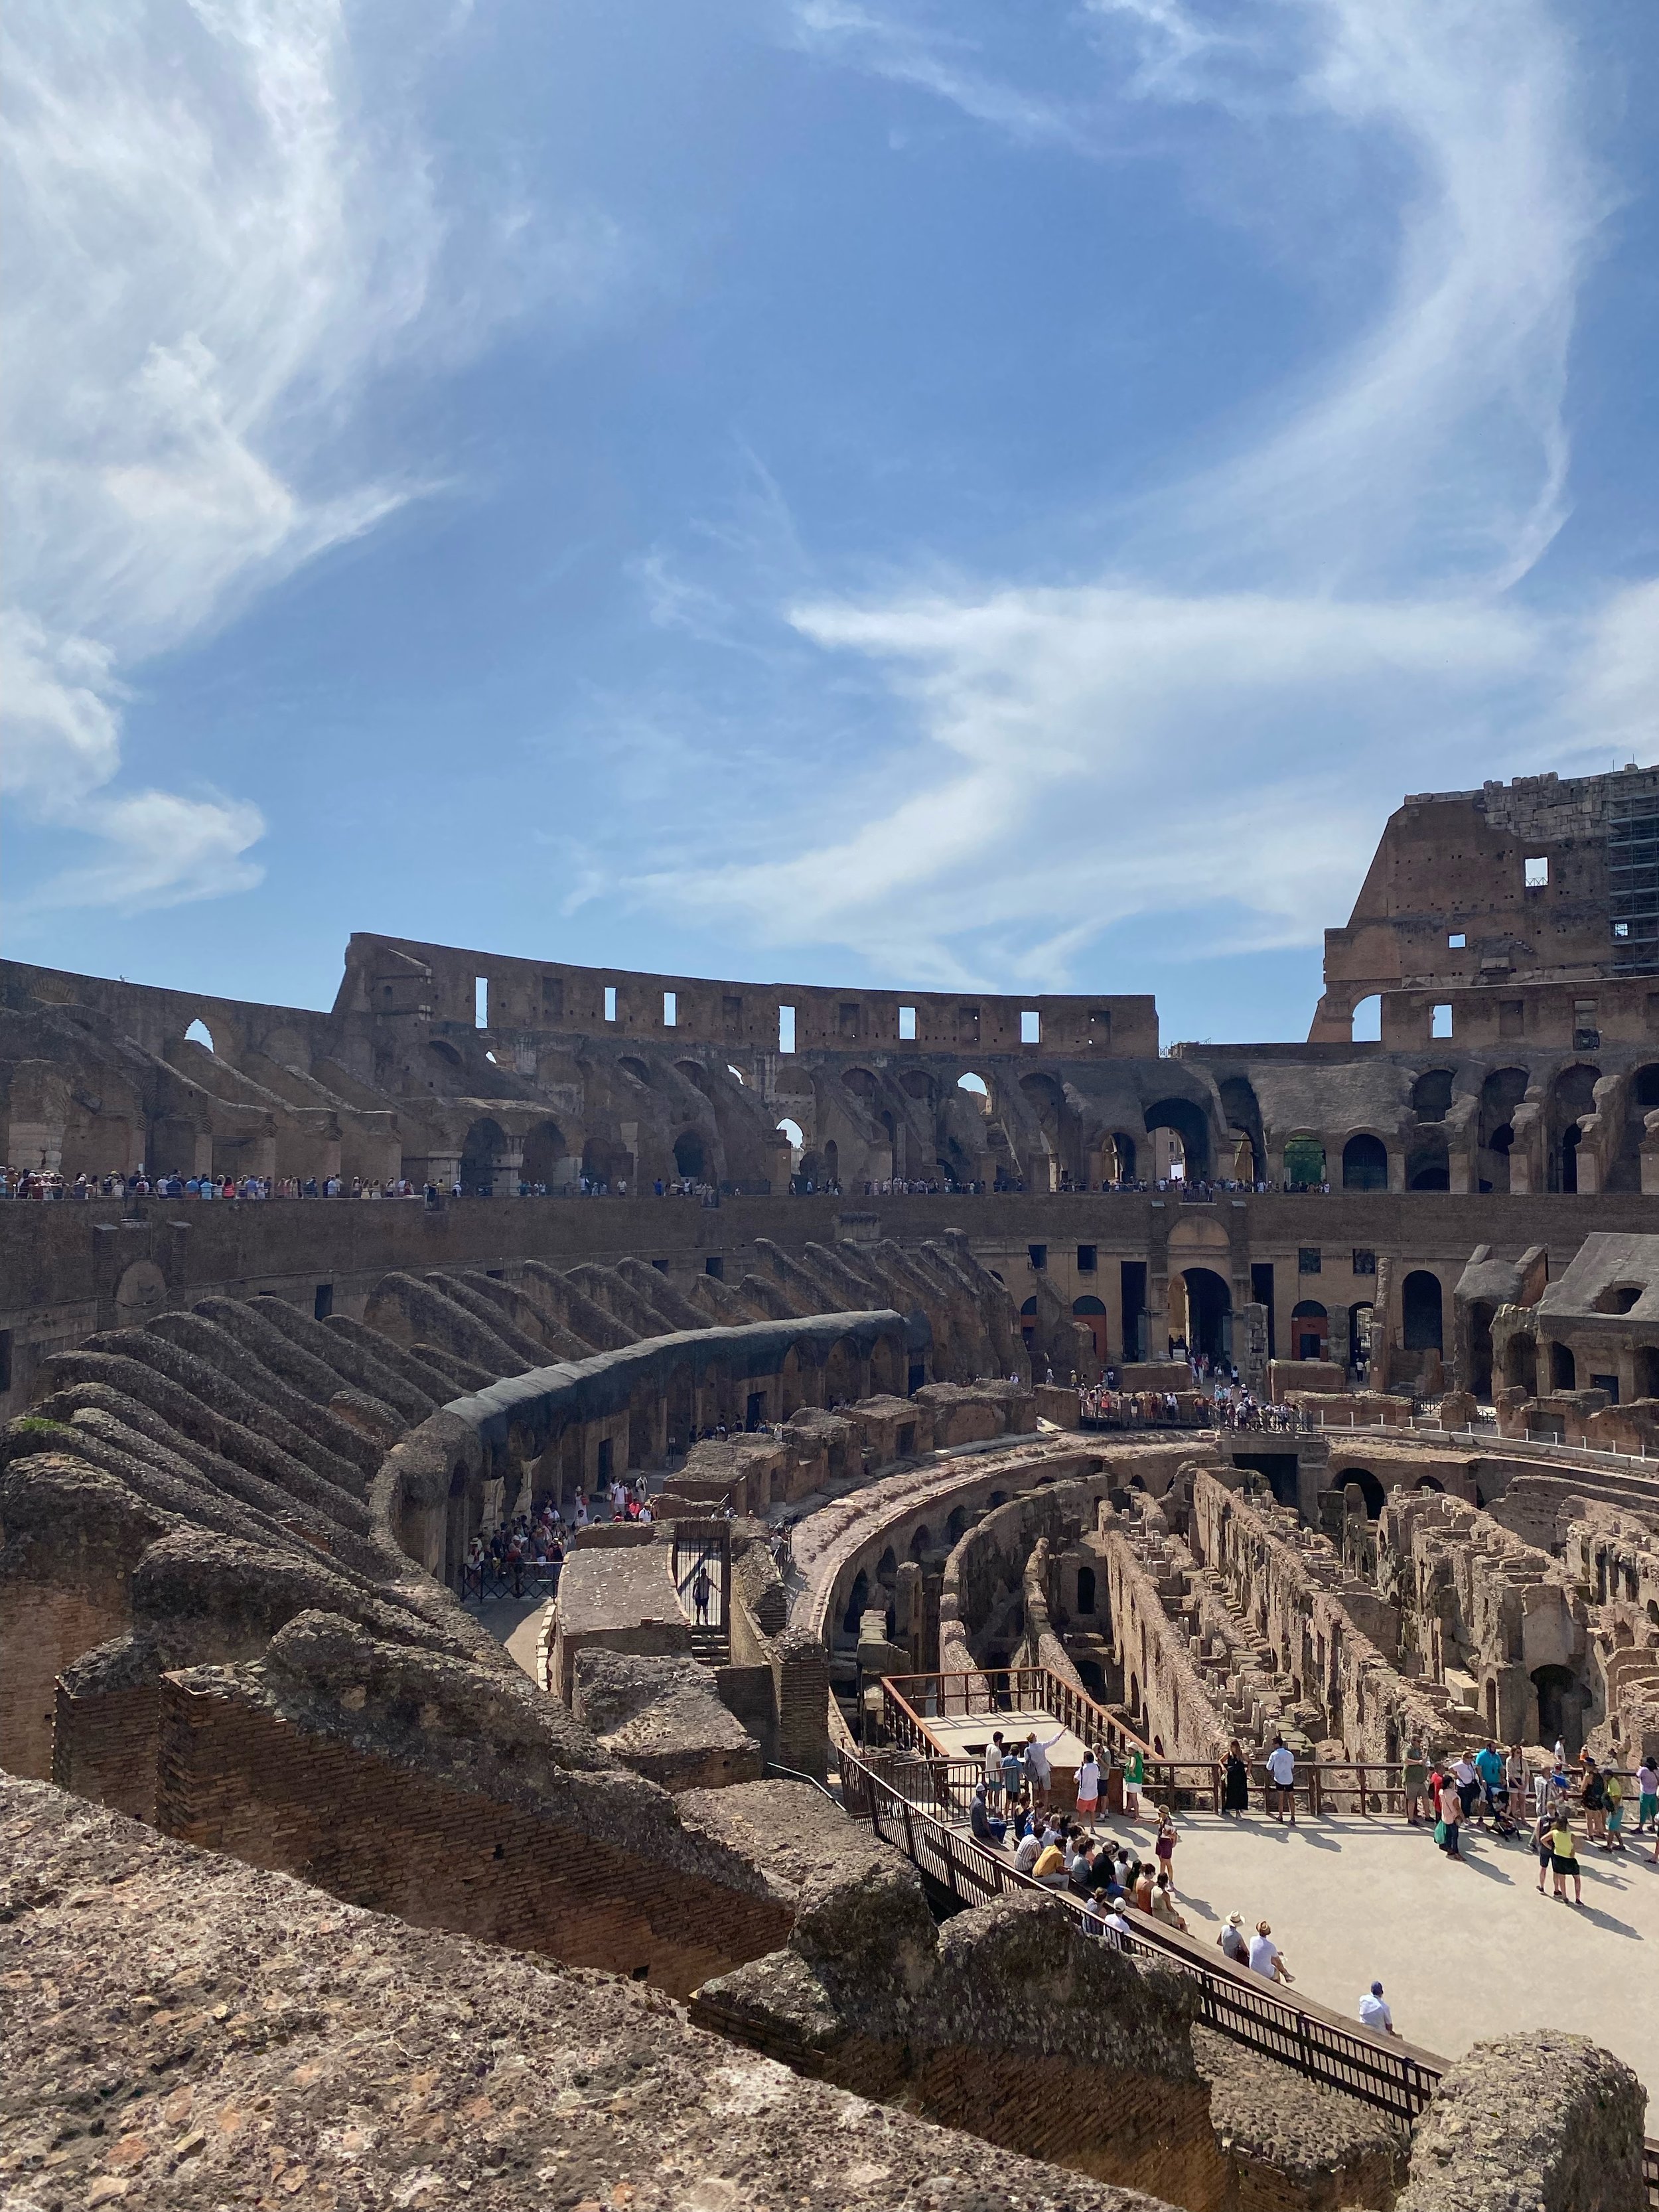 The colleseum July 2022